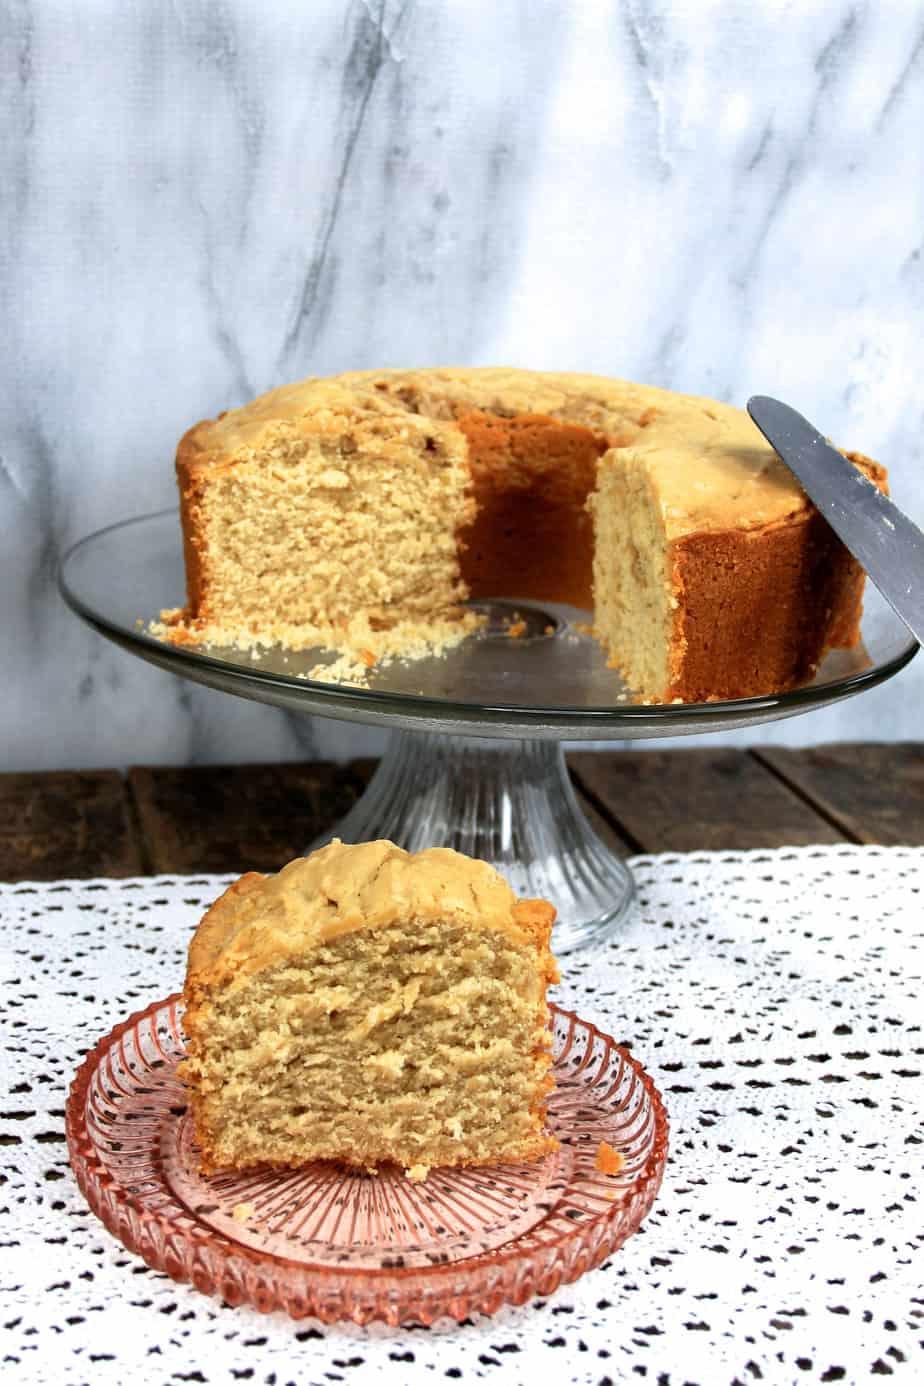 easy pound cake recipe to make from scratch